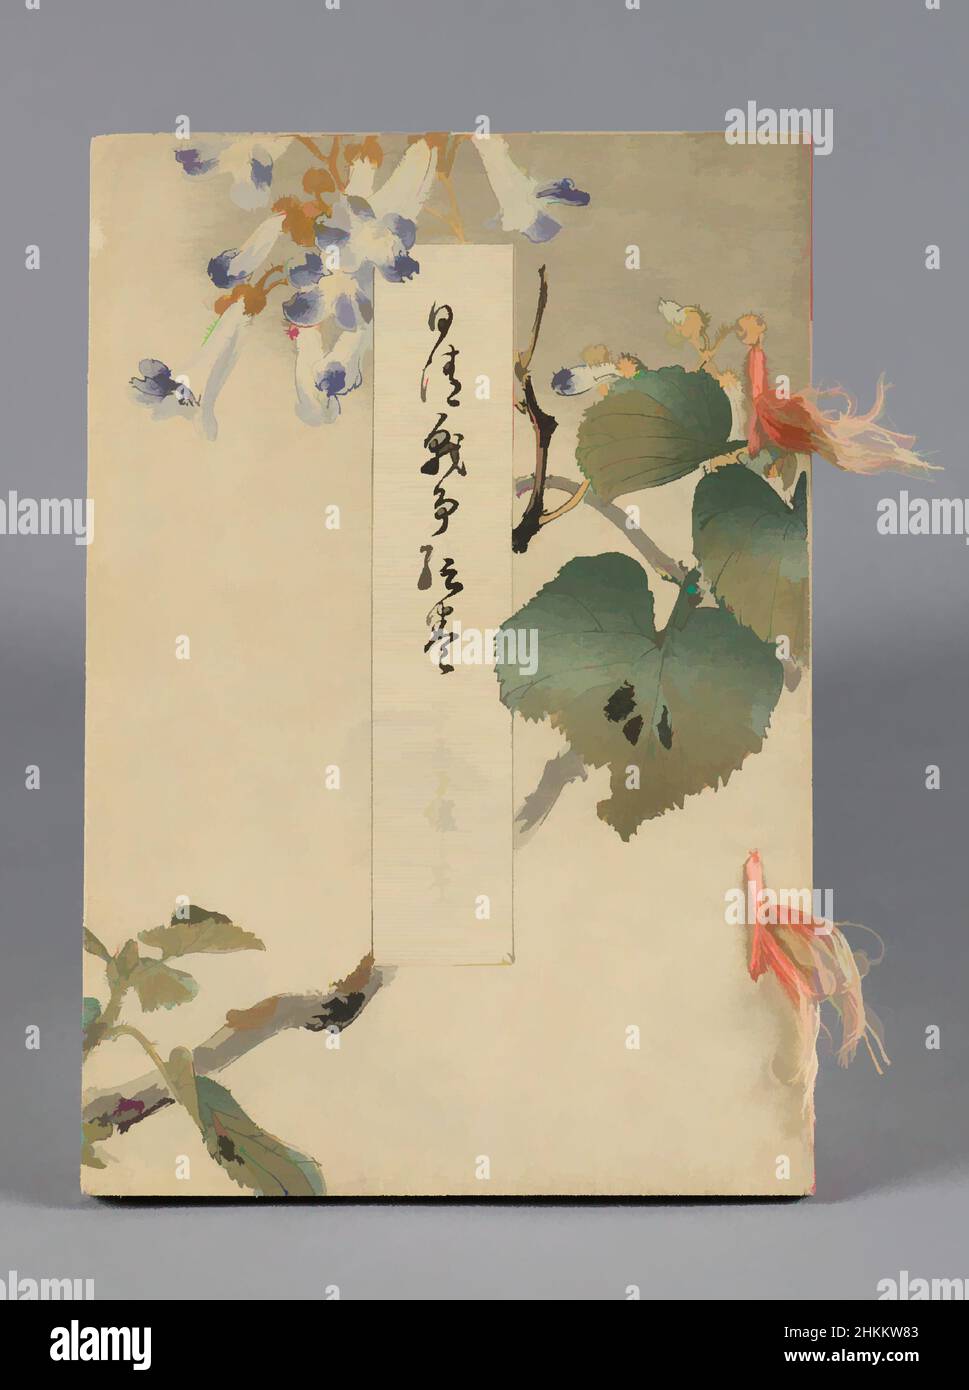 Art inspired by Nisshin sensō emaki (The Battles between Japan and China), Volume 5, Heijō no kan (Ping Yang), Suzuki Kason, Japanese, 1860-1919, Meiji period, 1868-1912, Shun'yōdō, 1895, Woodblock-printed book, Tokyo, Japan, Asia, Books & manuscripts, each volume: 9 1/2 × 6 7/16 × 1/4, Classic works modernized by Artotop with a splash of modernity. Shapes, color and value, eye-catching visual impact on art. Emotions through freedom of artworks in a contemporary way. A timeless message pursuing a wildly creative new direction. Artists turning to the digital medium and creating the Artotop NFT Stock Photo